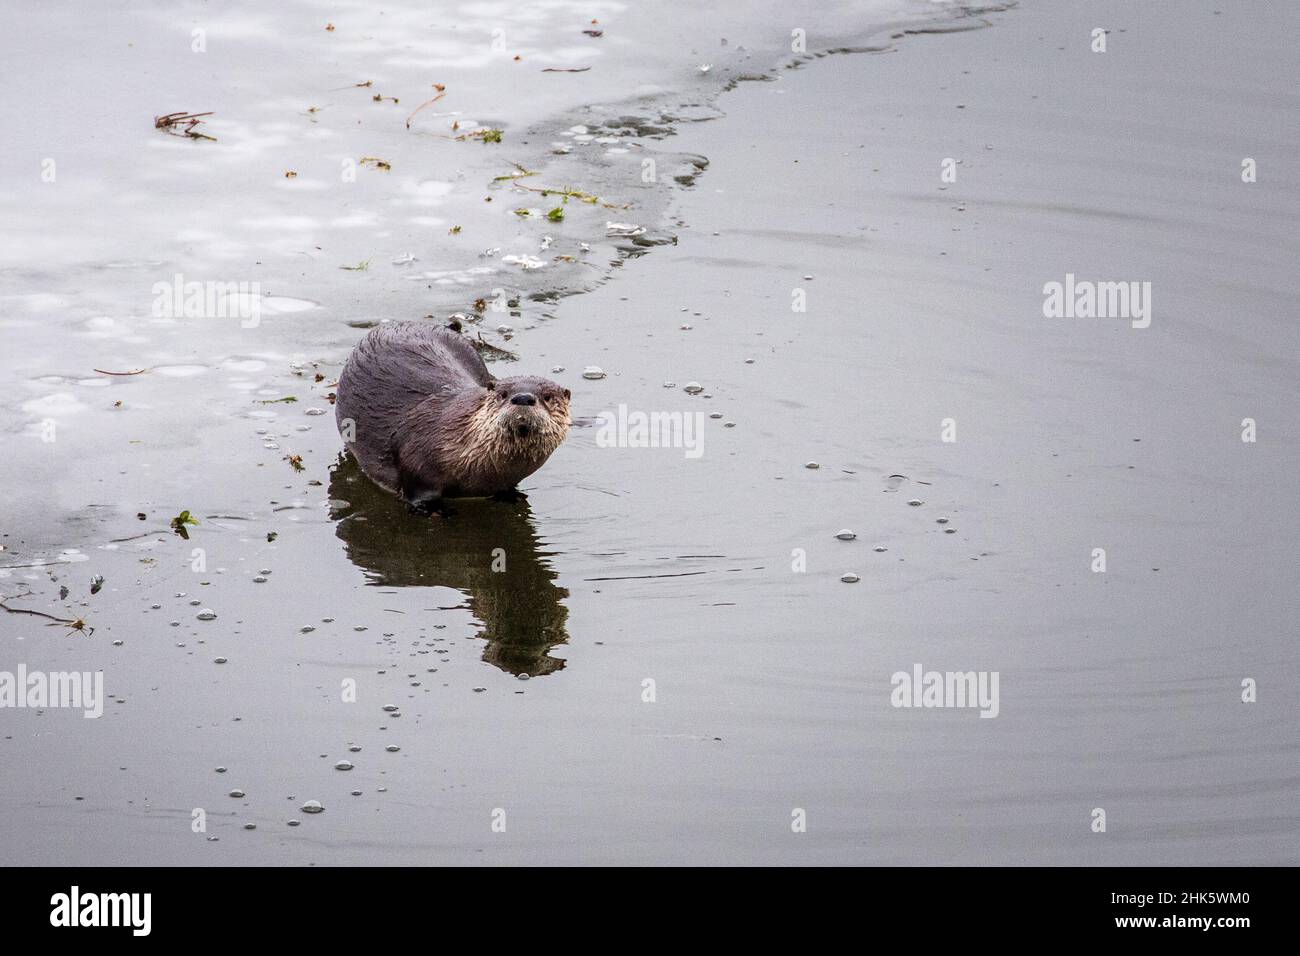 River Otter (Lontra canadensis) near a sheet of ice at Lake Almanor in Plumas County, California, USA. Stock Photo